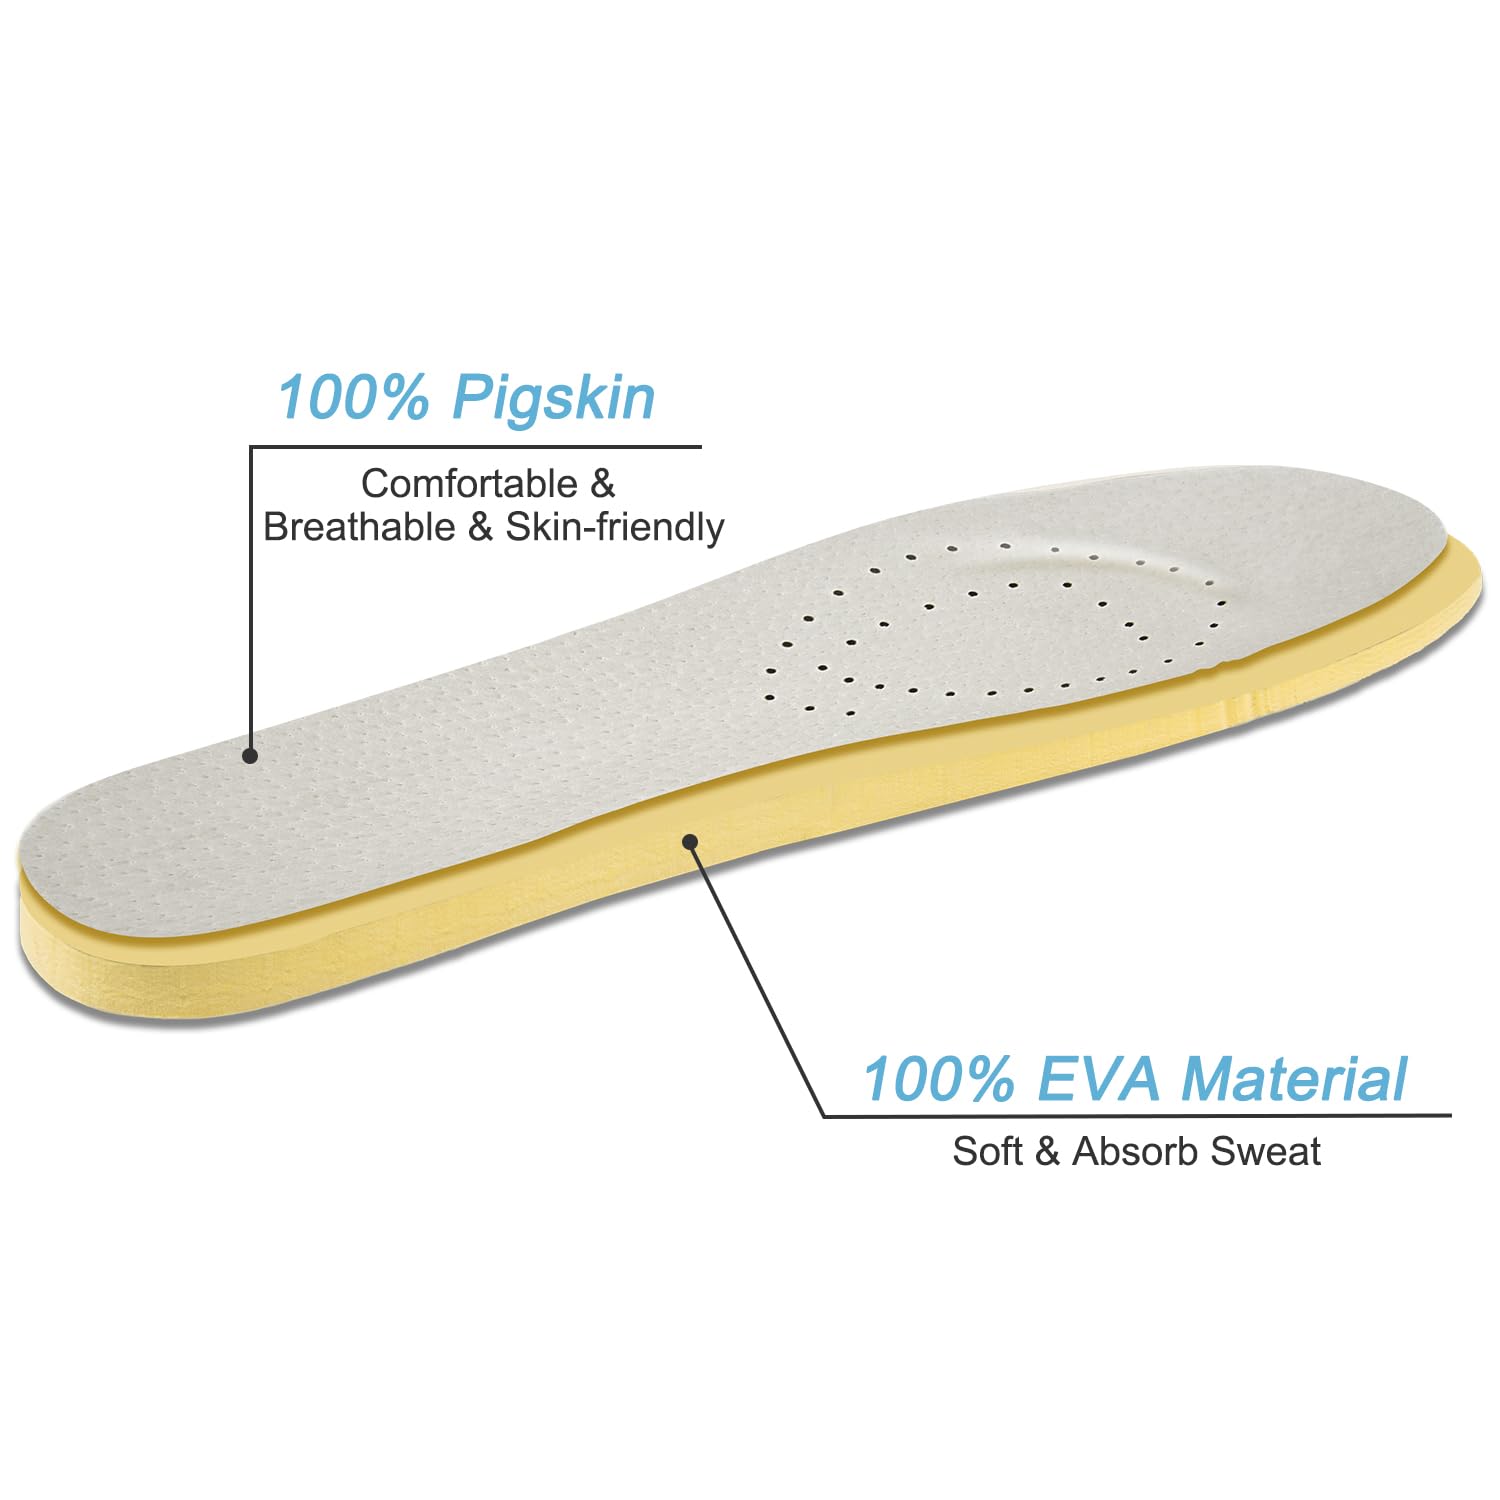 Classic Insoles for Hey Dude Men's Wally Shoes Replacement, Footwear Inserts Comfortable & Light-Weight(US Size:M12 / EU Size:45)